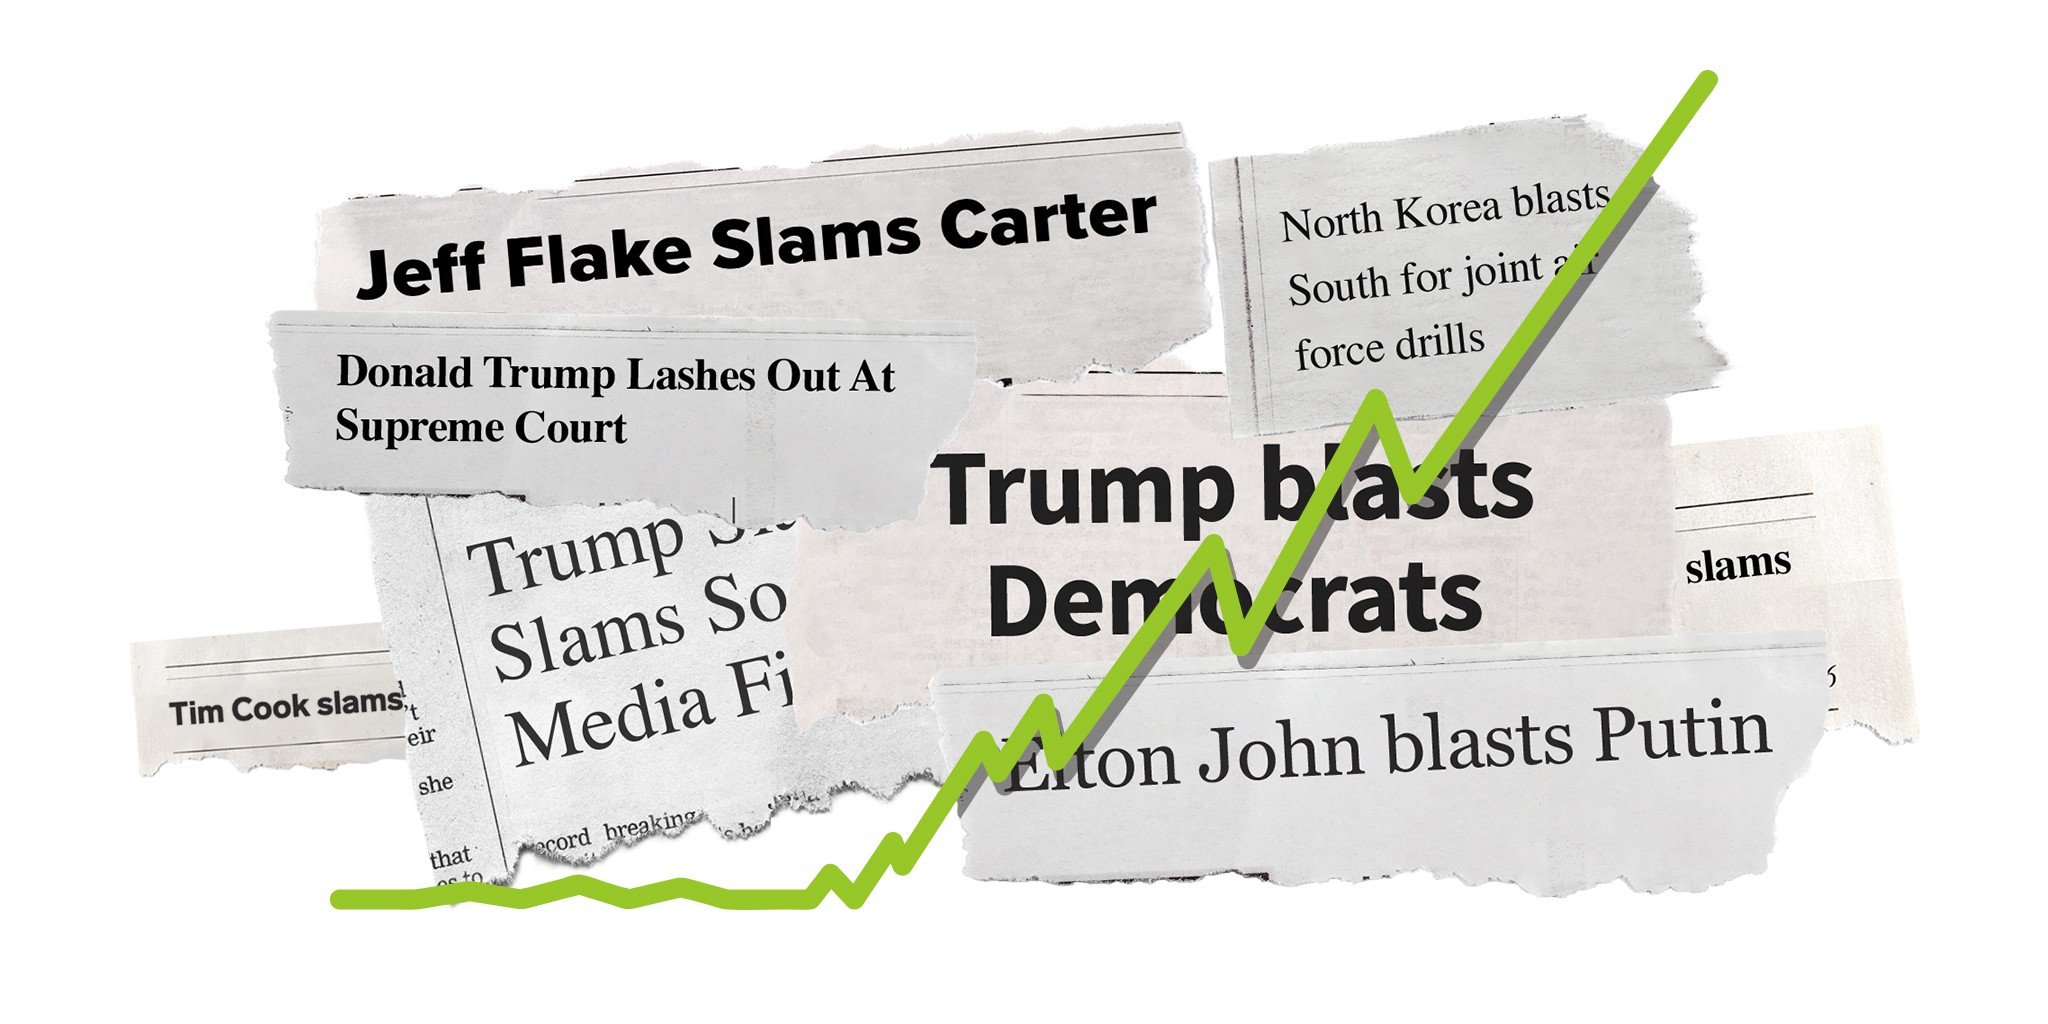 Clippings of newspaper headlines with a green line going up and to the right showing an increase